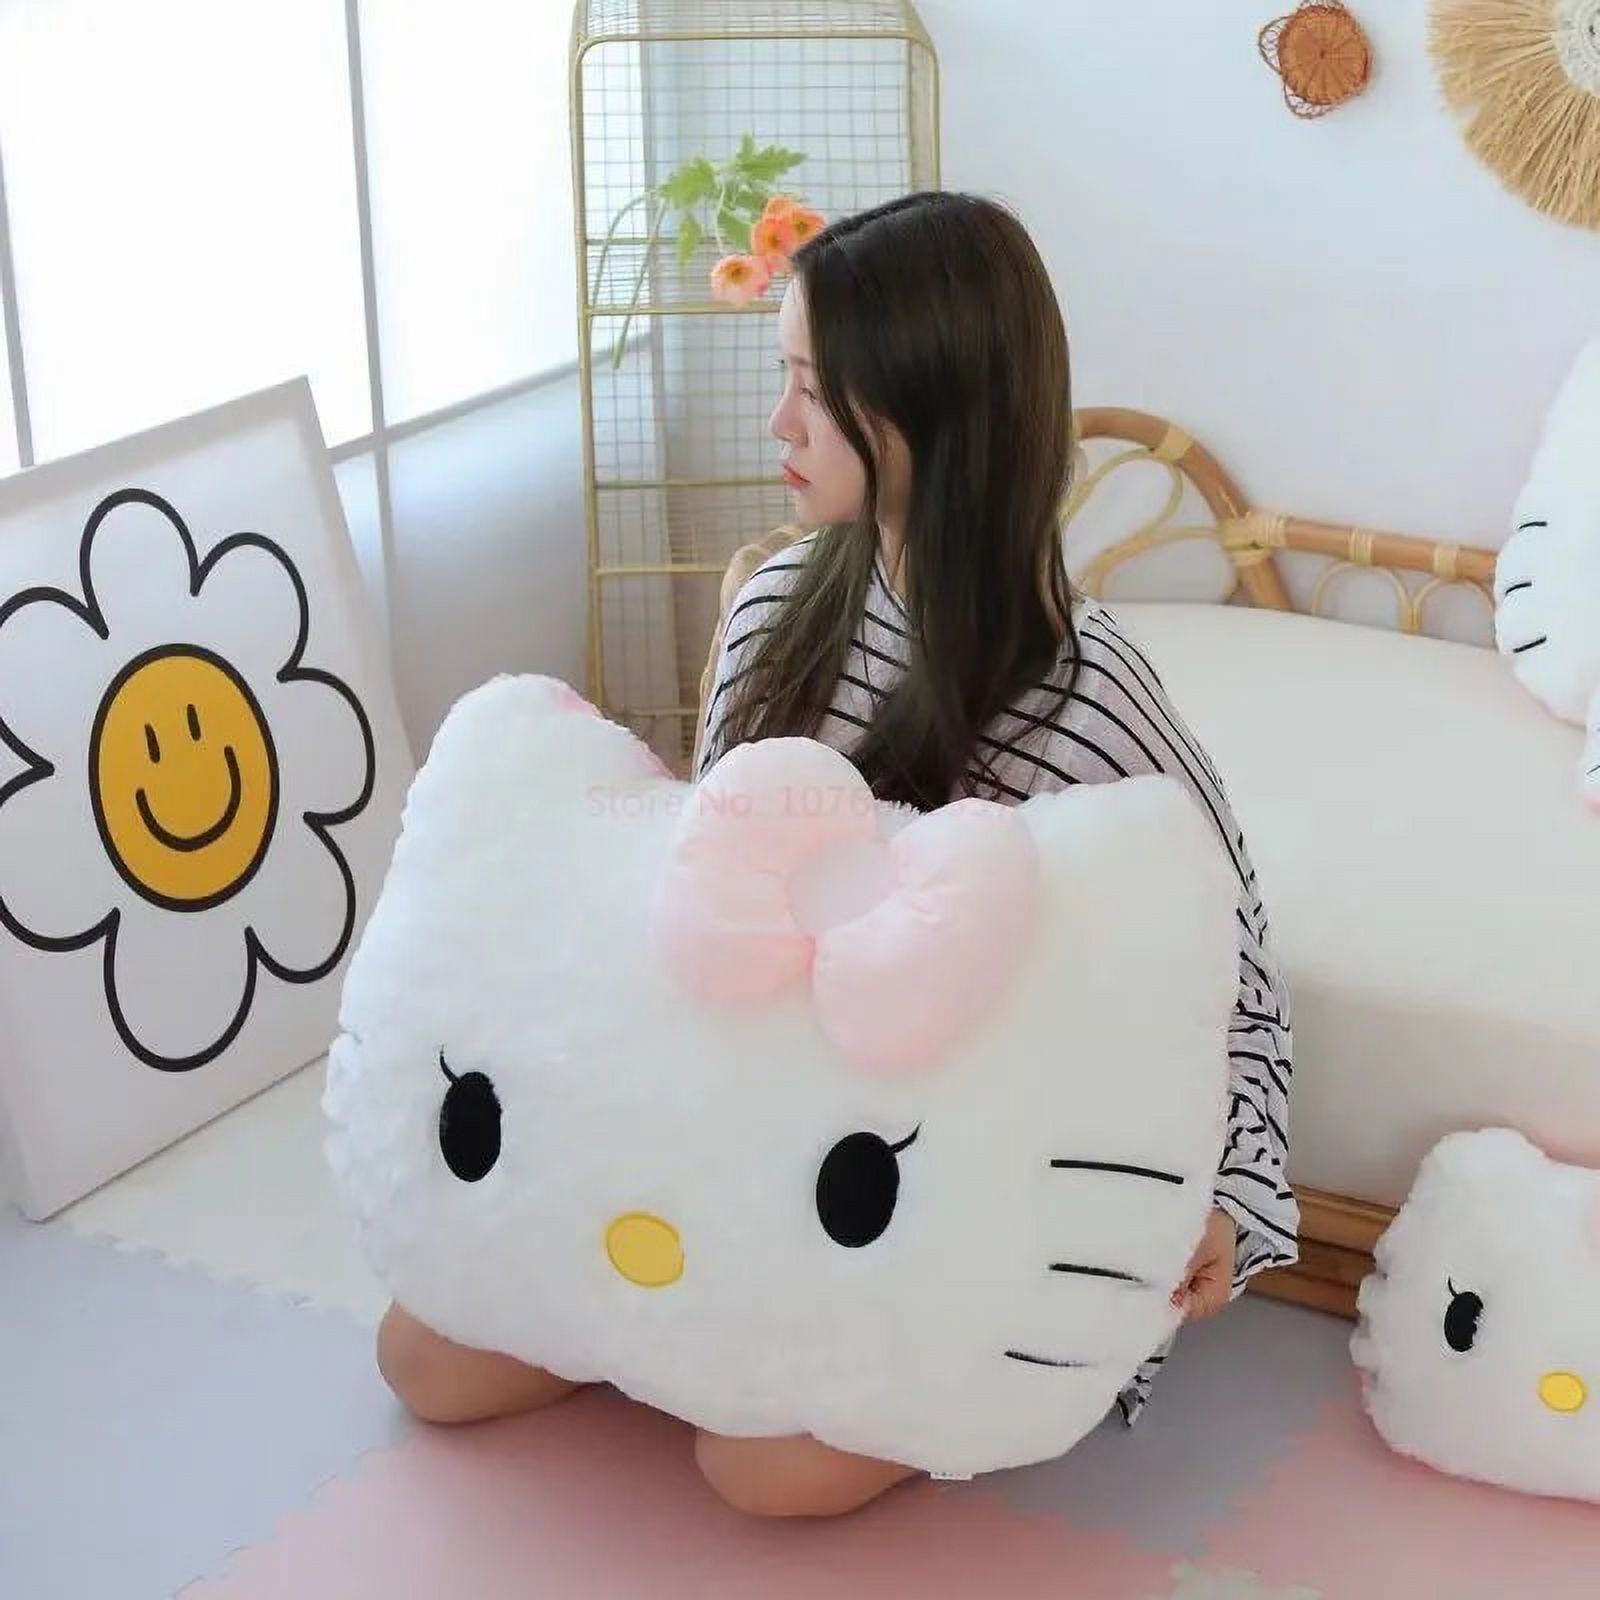 A Introduction to Giant Hello Kitty Plush